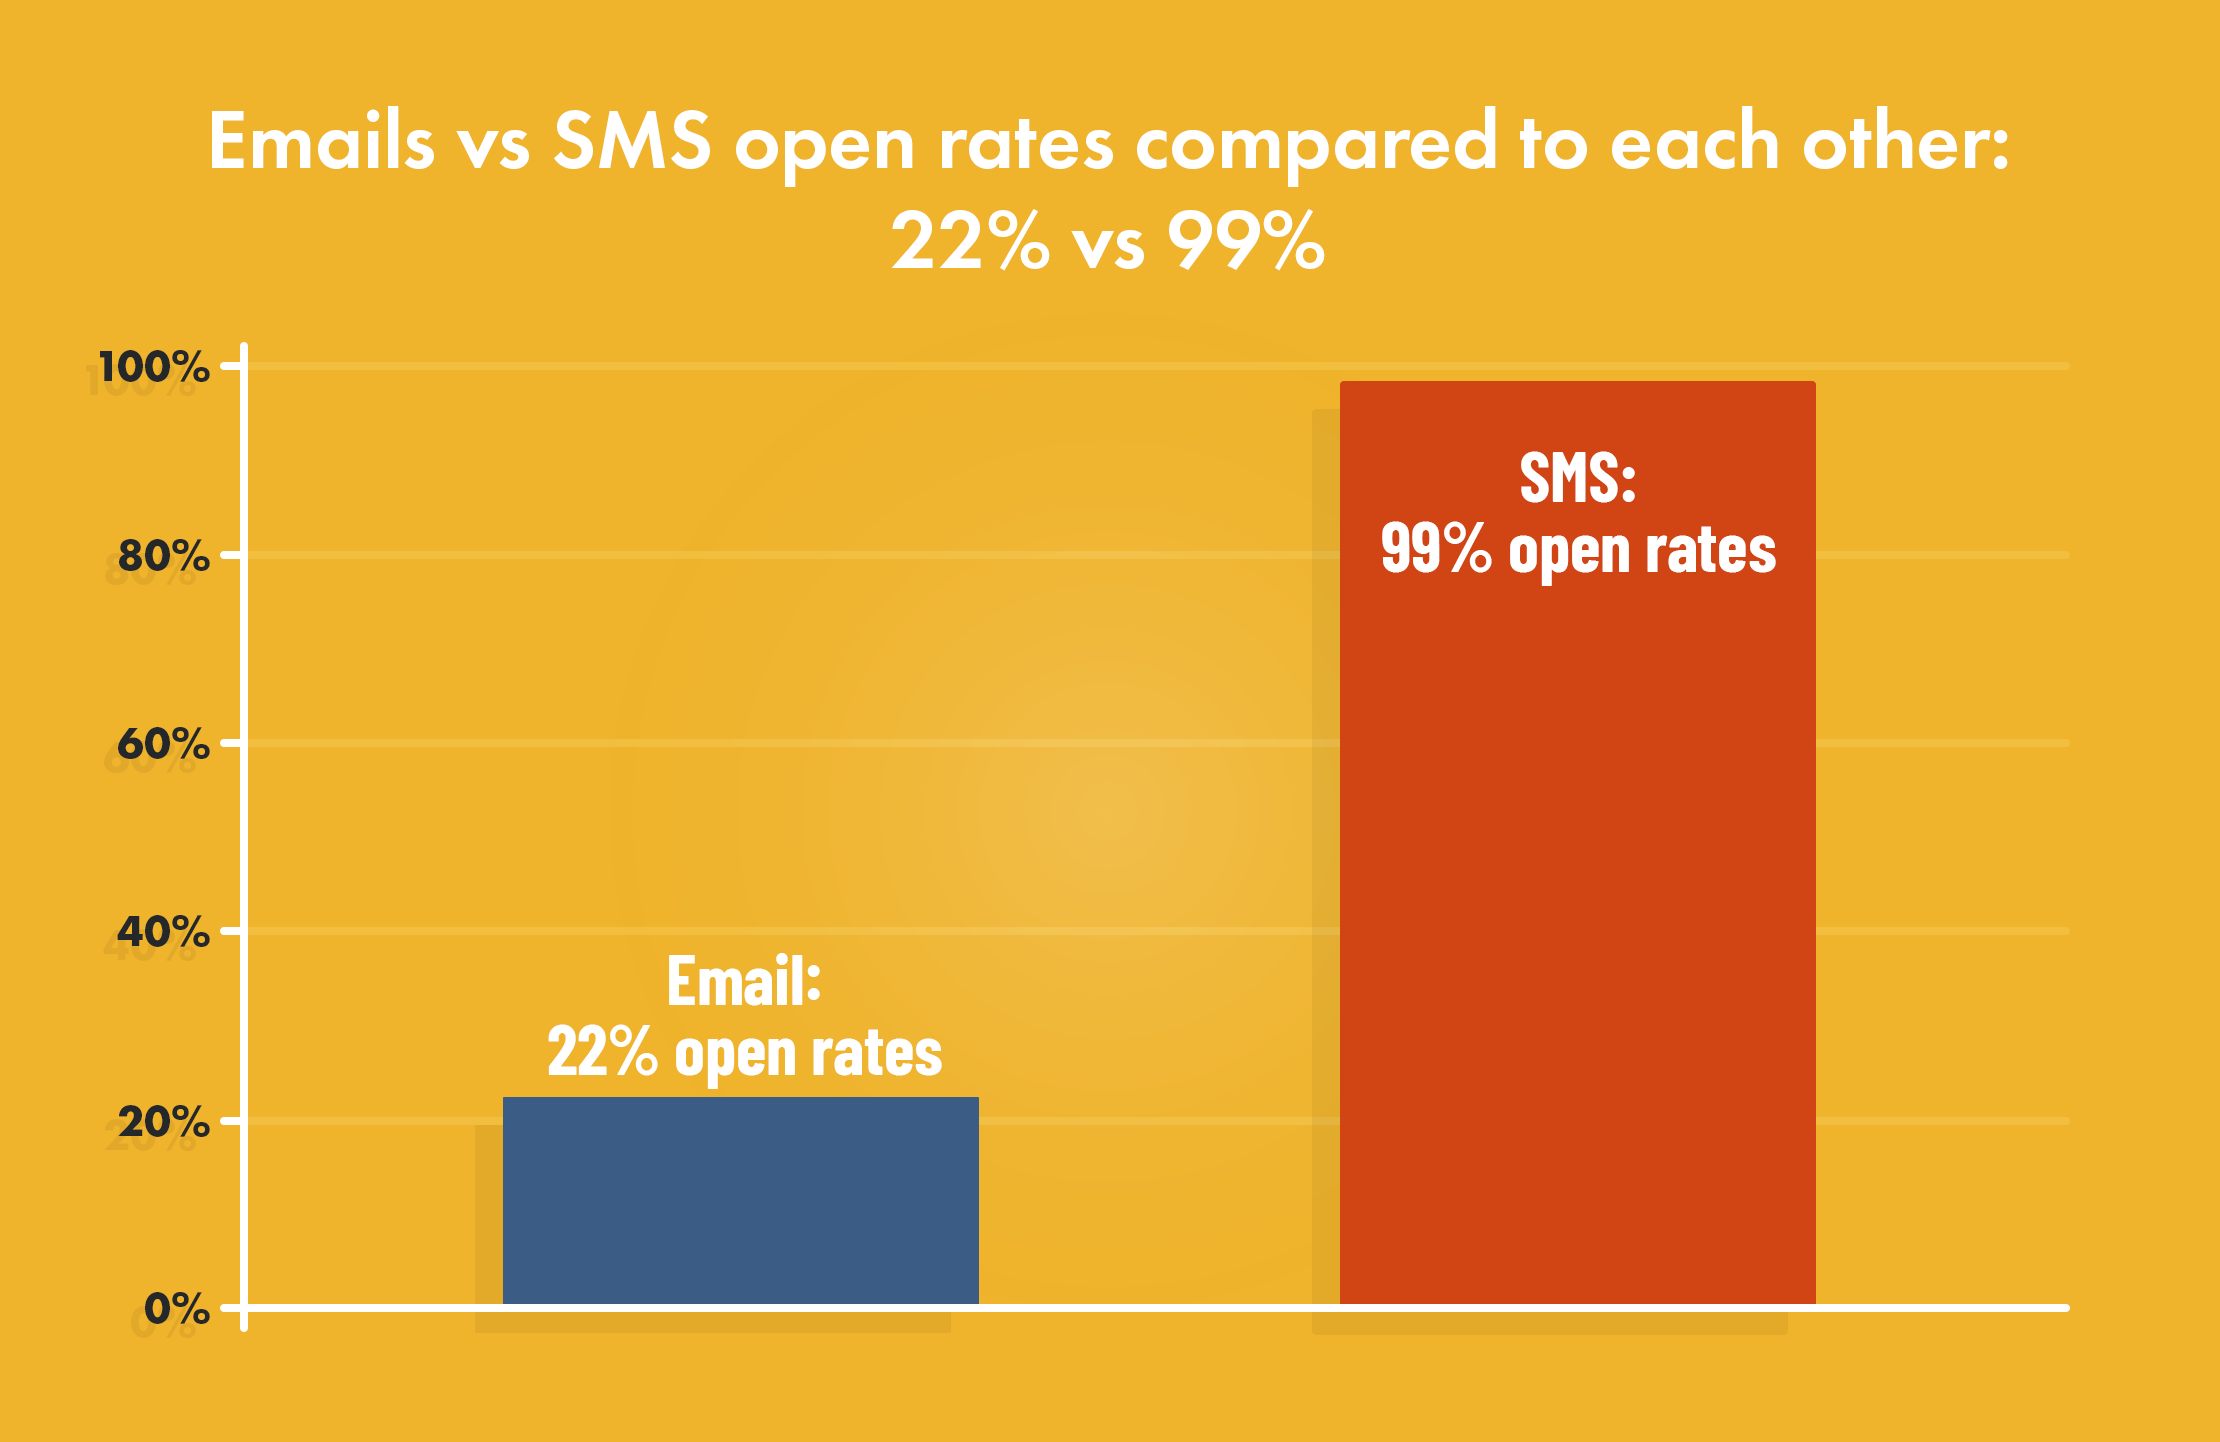 Emails vs SMS open rates compared to each other: 22% vs 99%